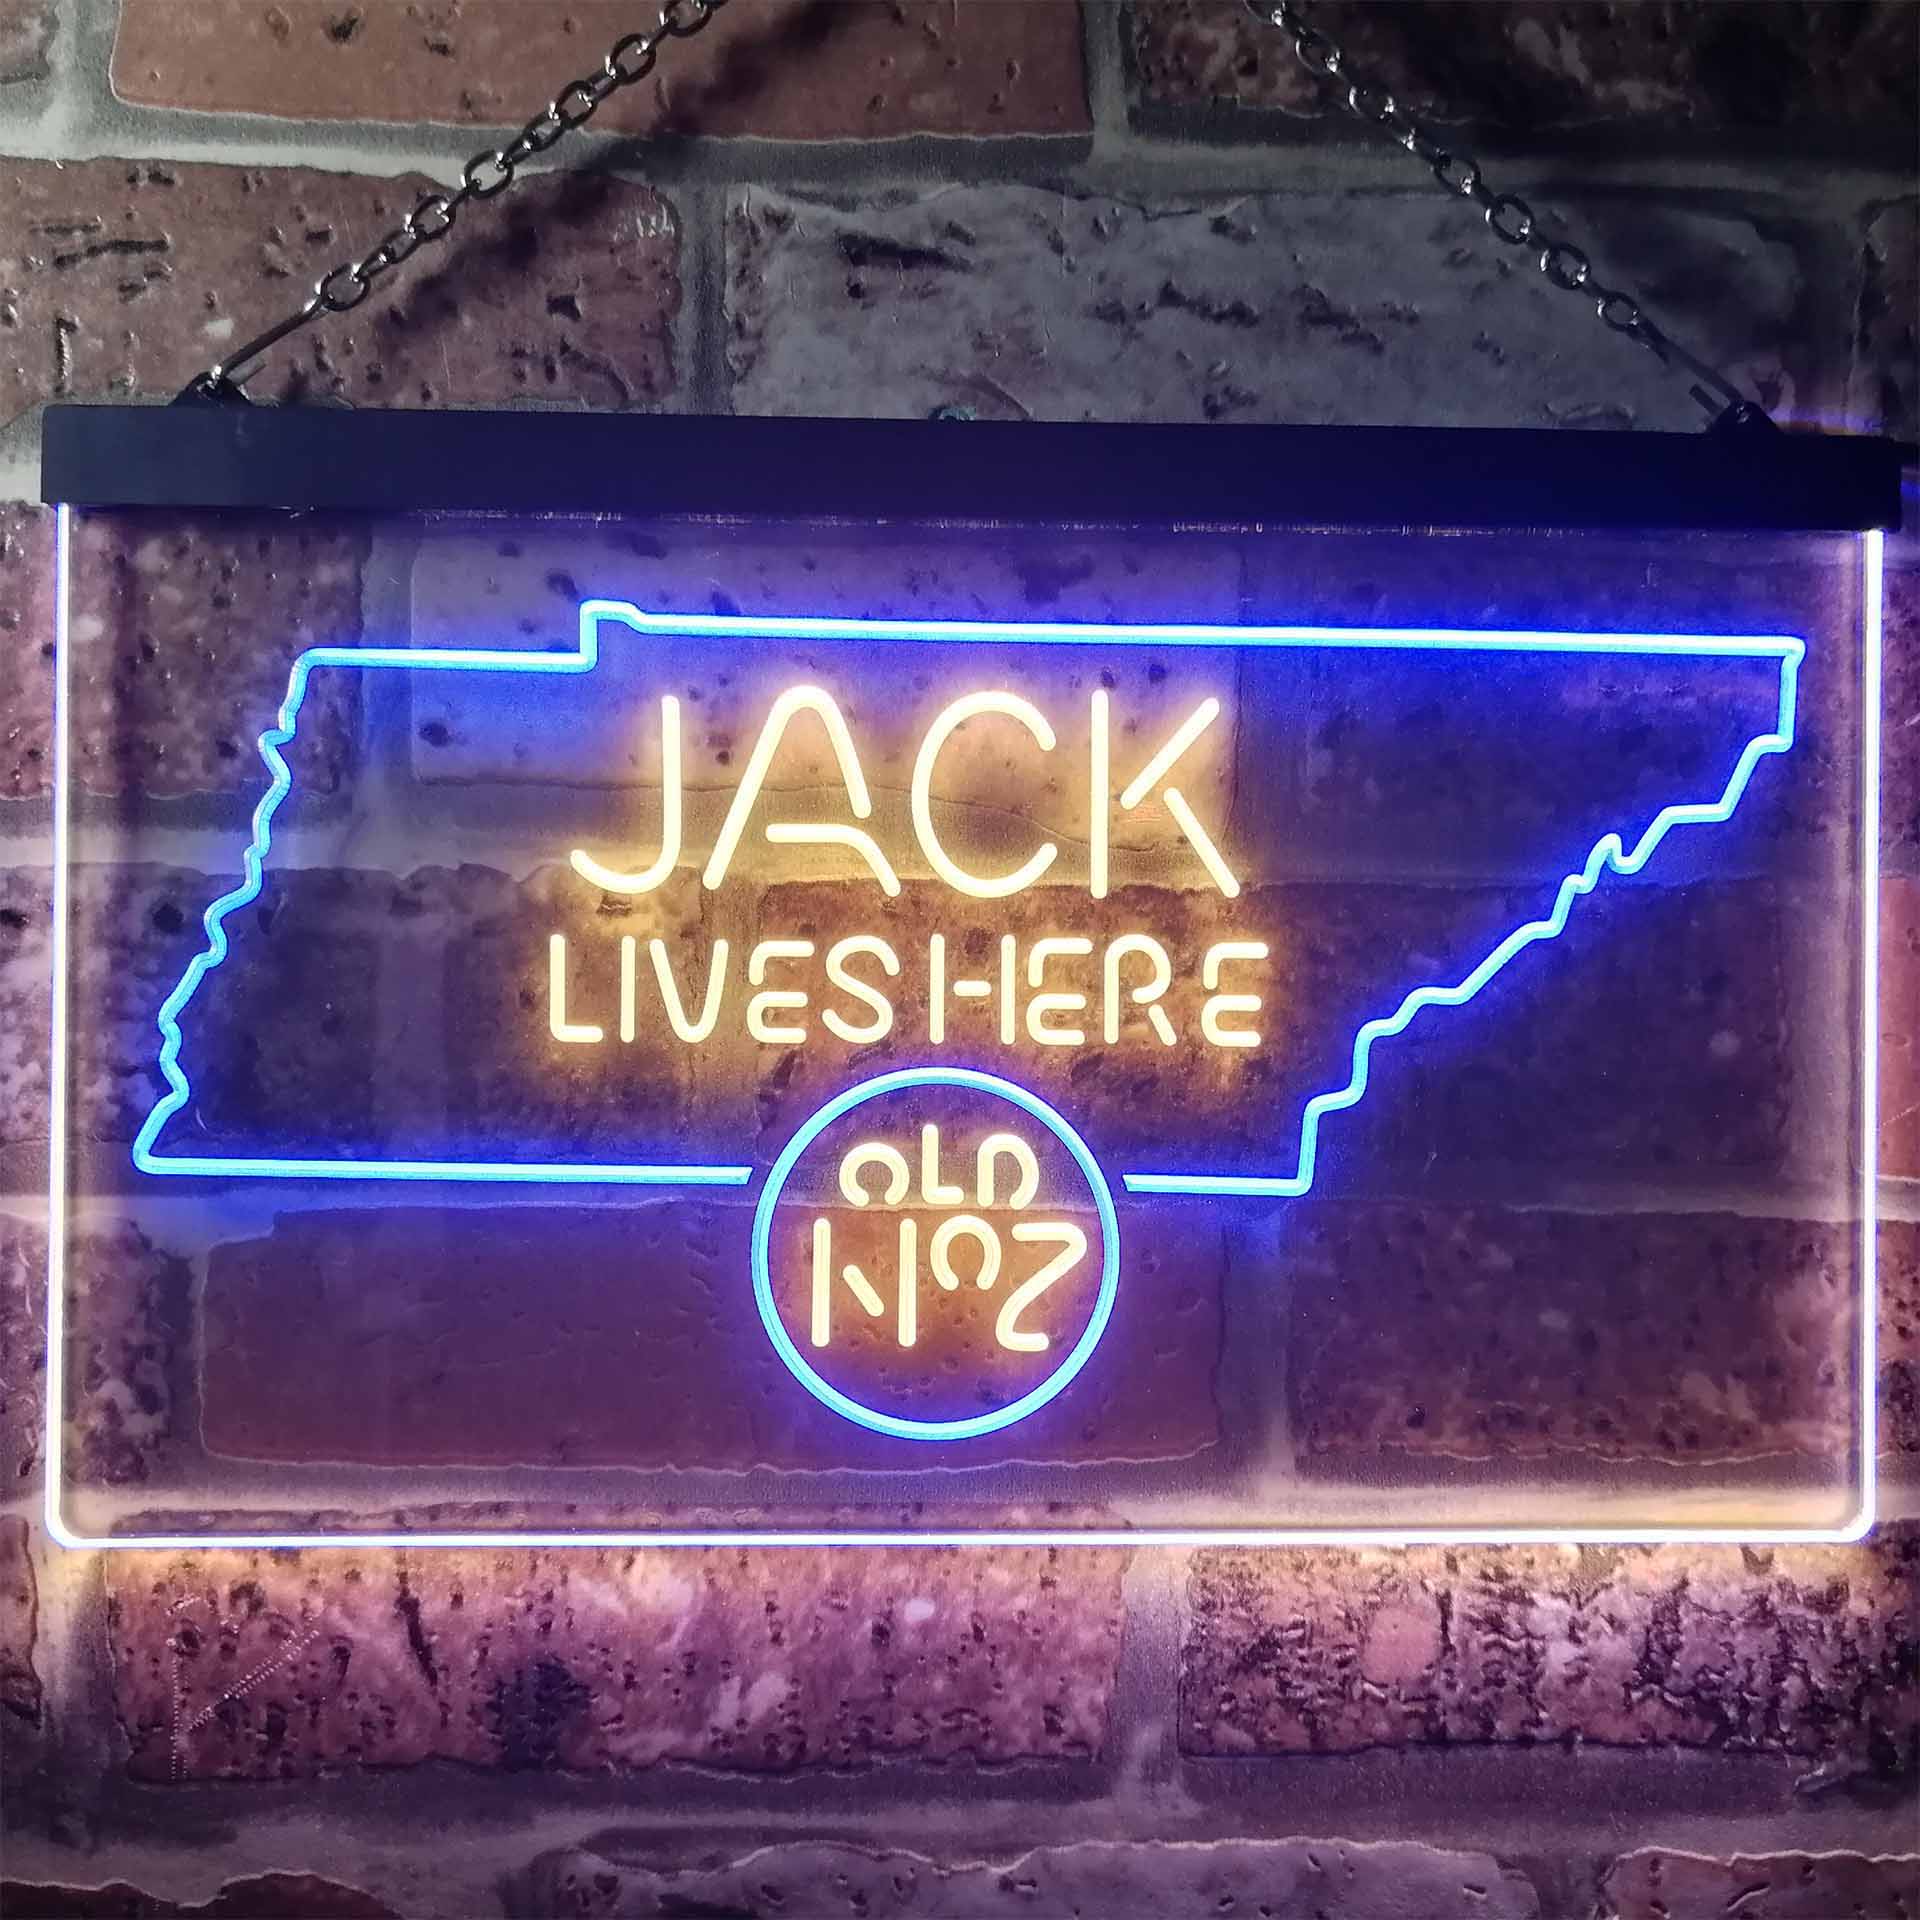 Tennessee Jack Lives Here Dual Color LED Neon Sign ProLedSign